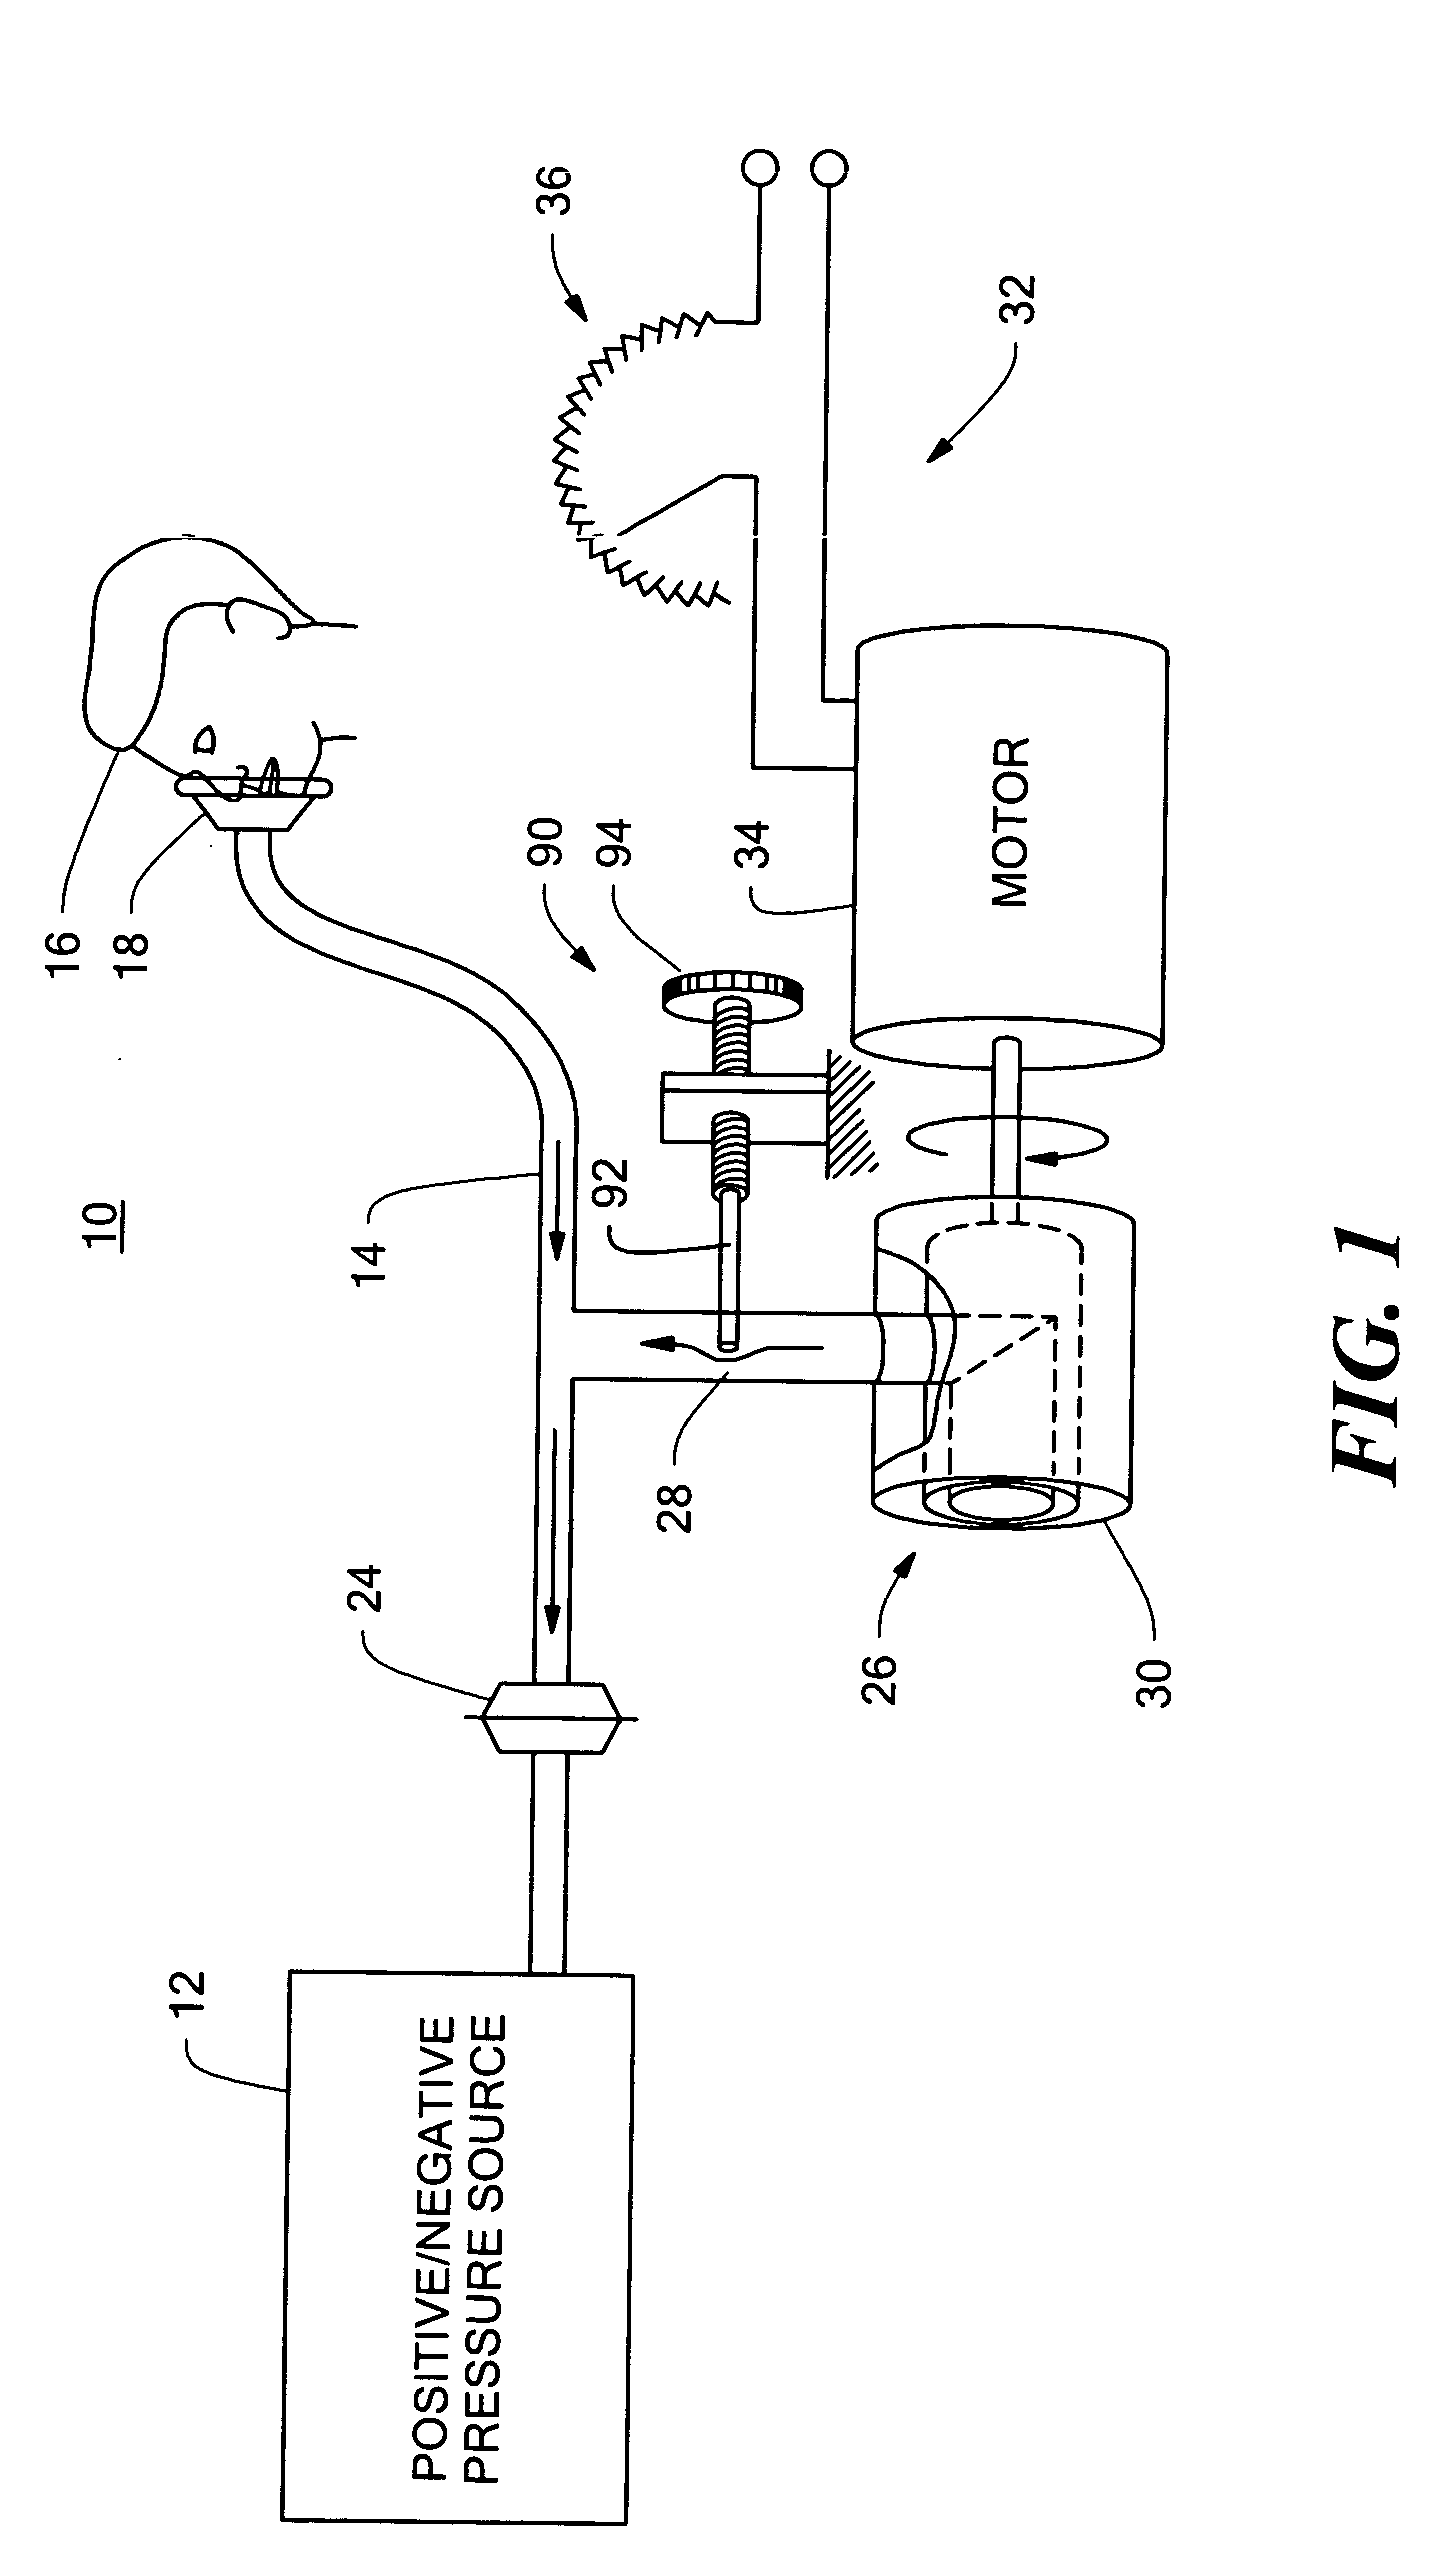 Insufflation-exsufflation system with percussive assist for removal of broncho-pulmonary secretions